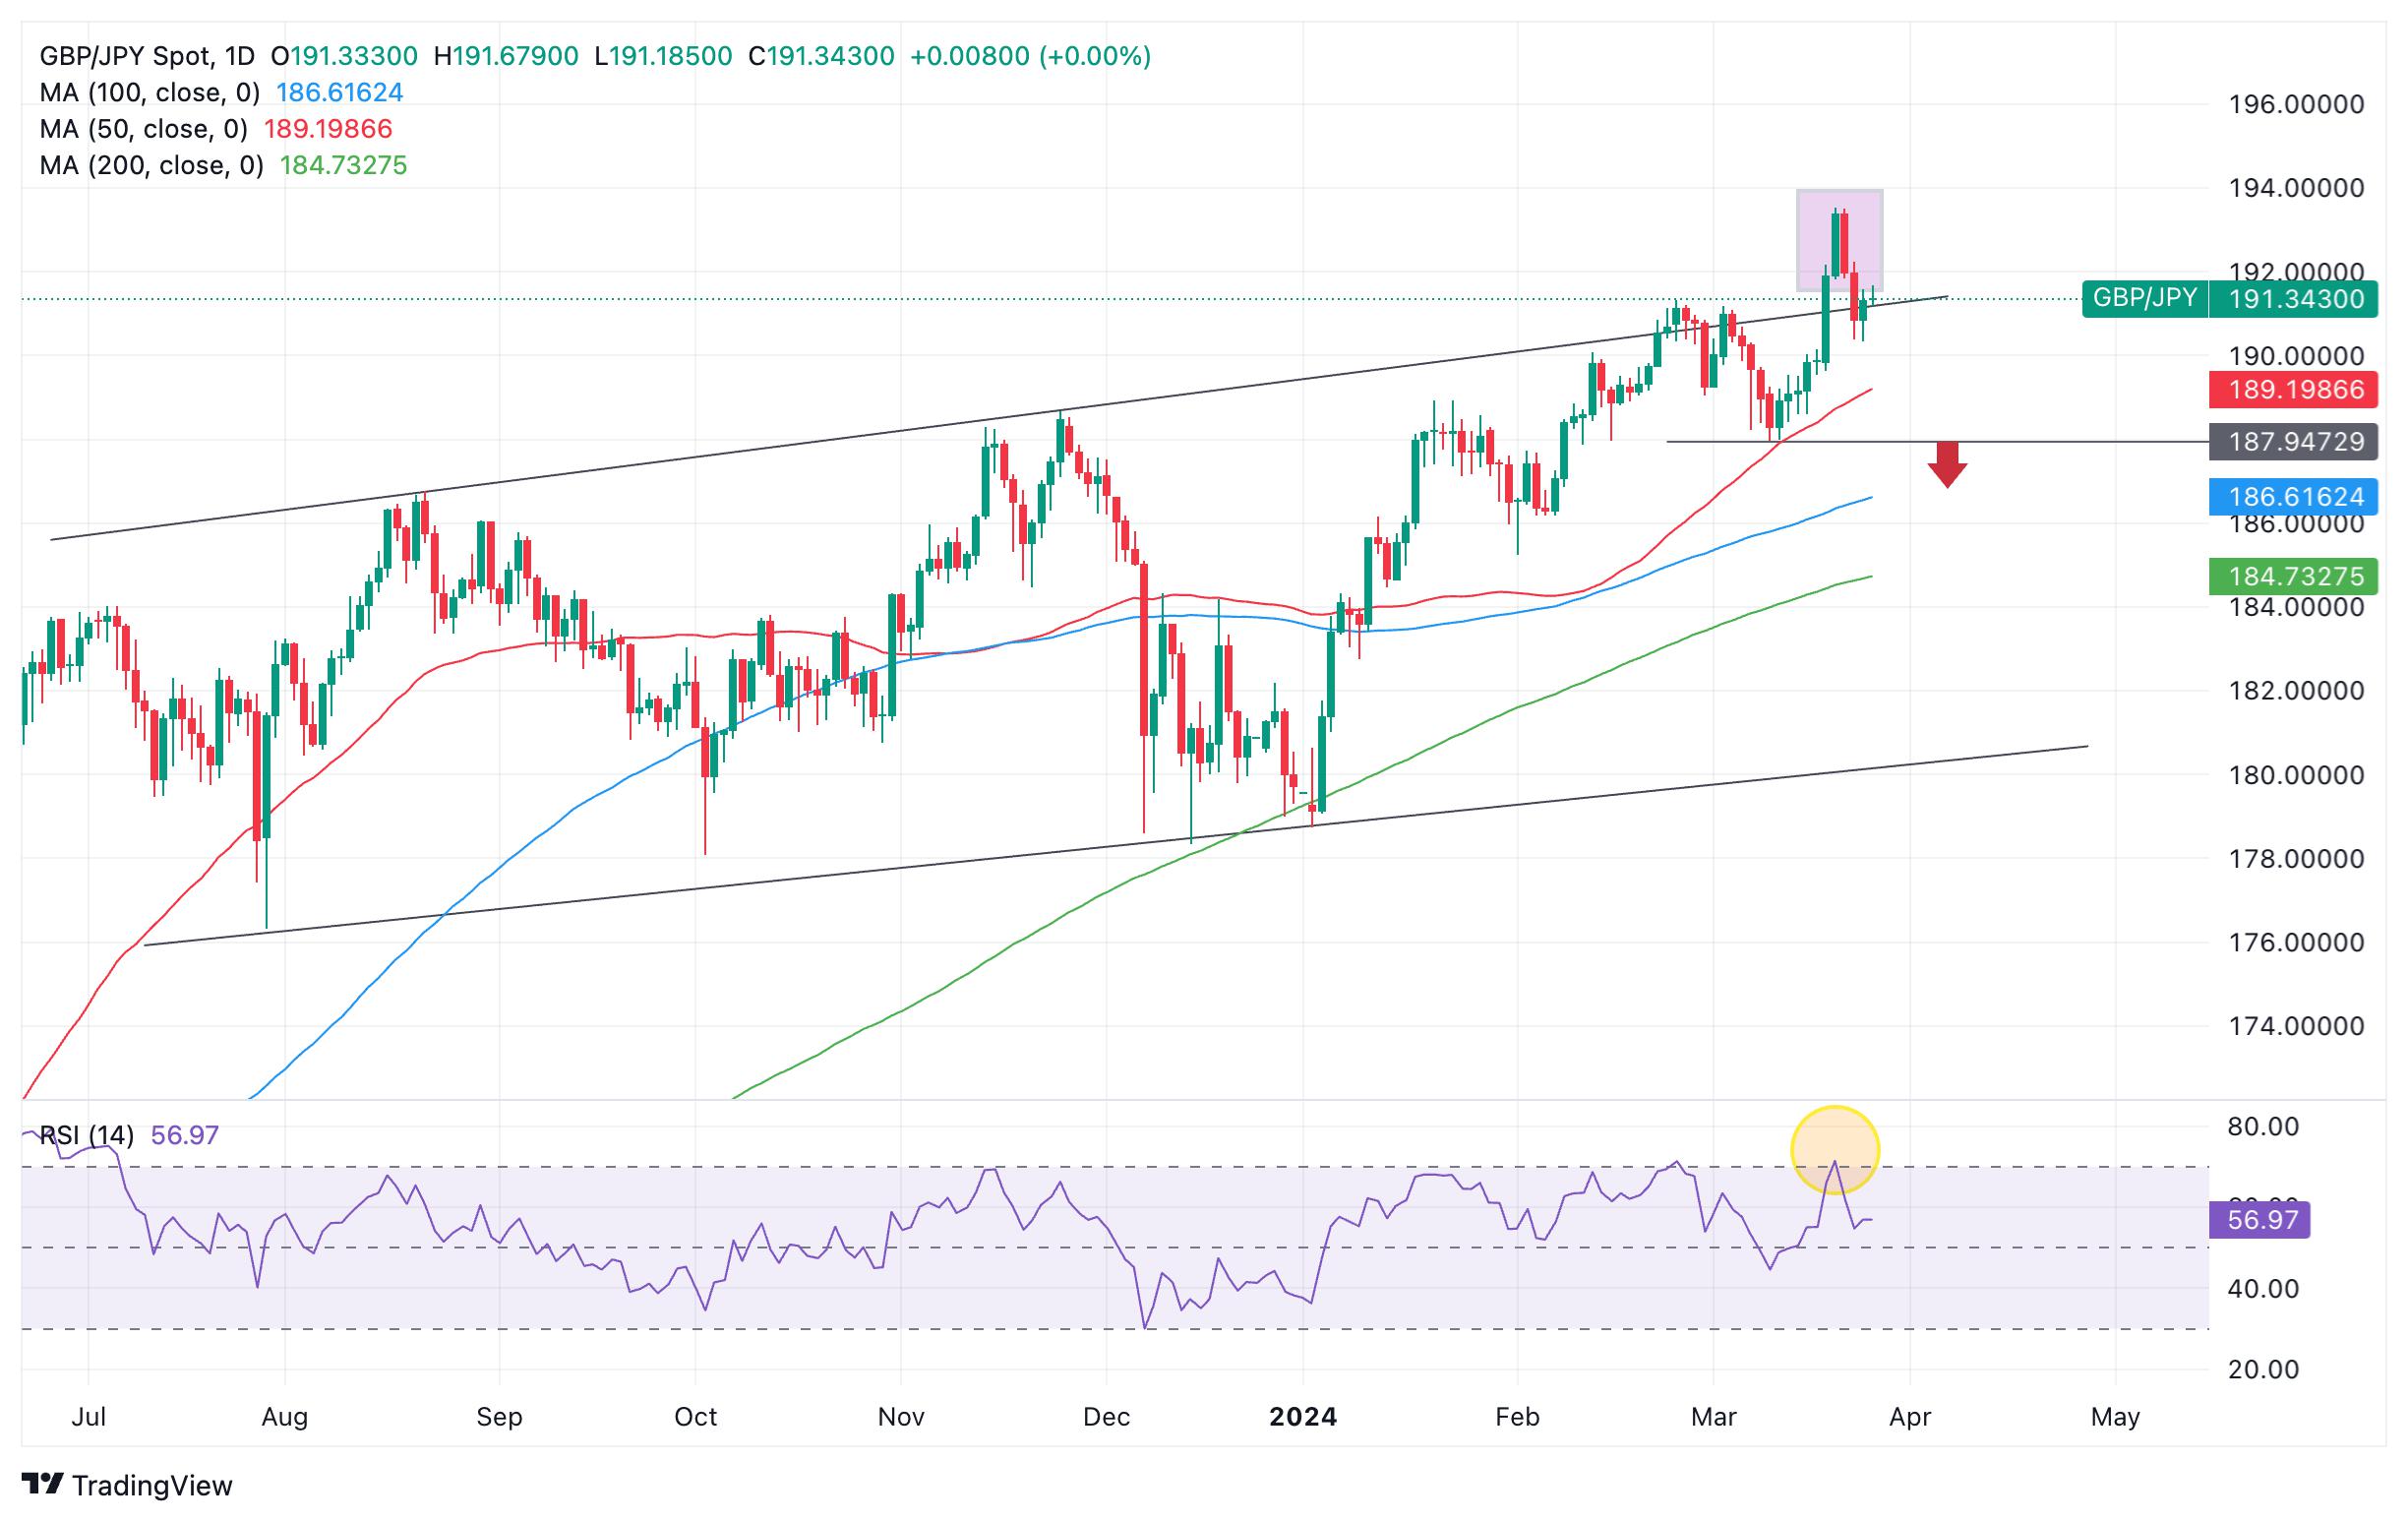 GBP/JPY Price Analysis: Rolls over and finds support at borderline of Wedge